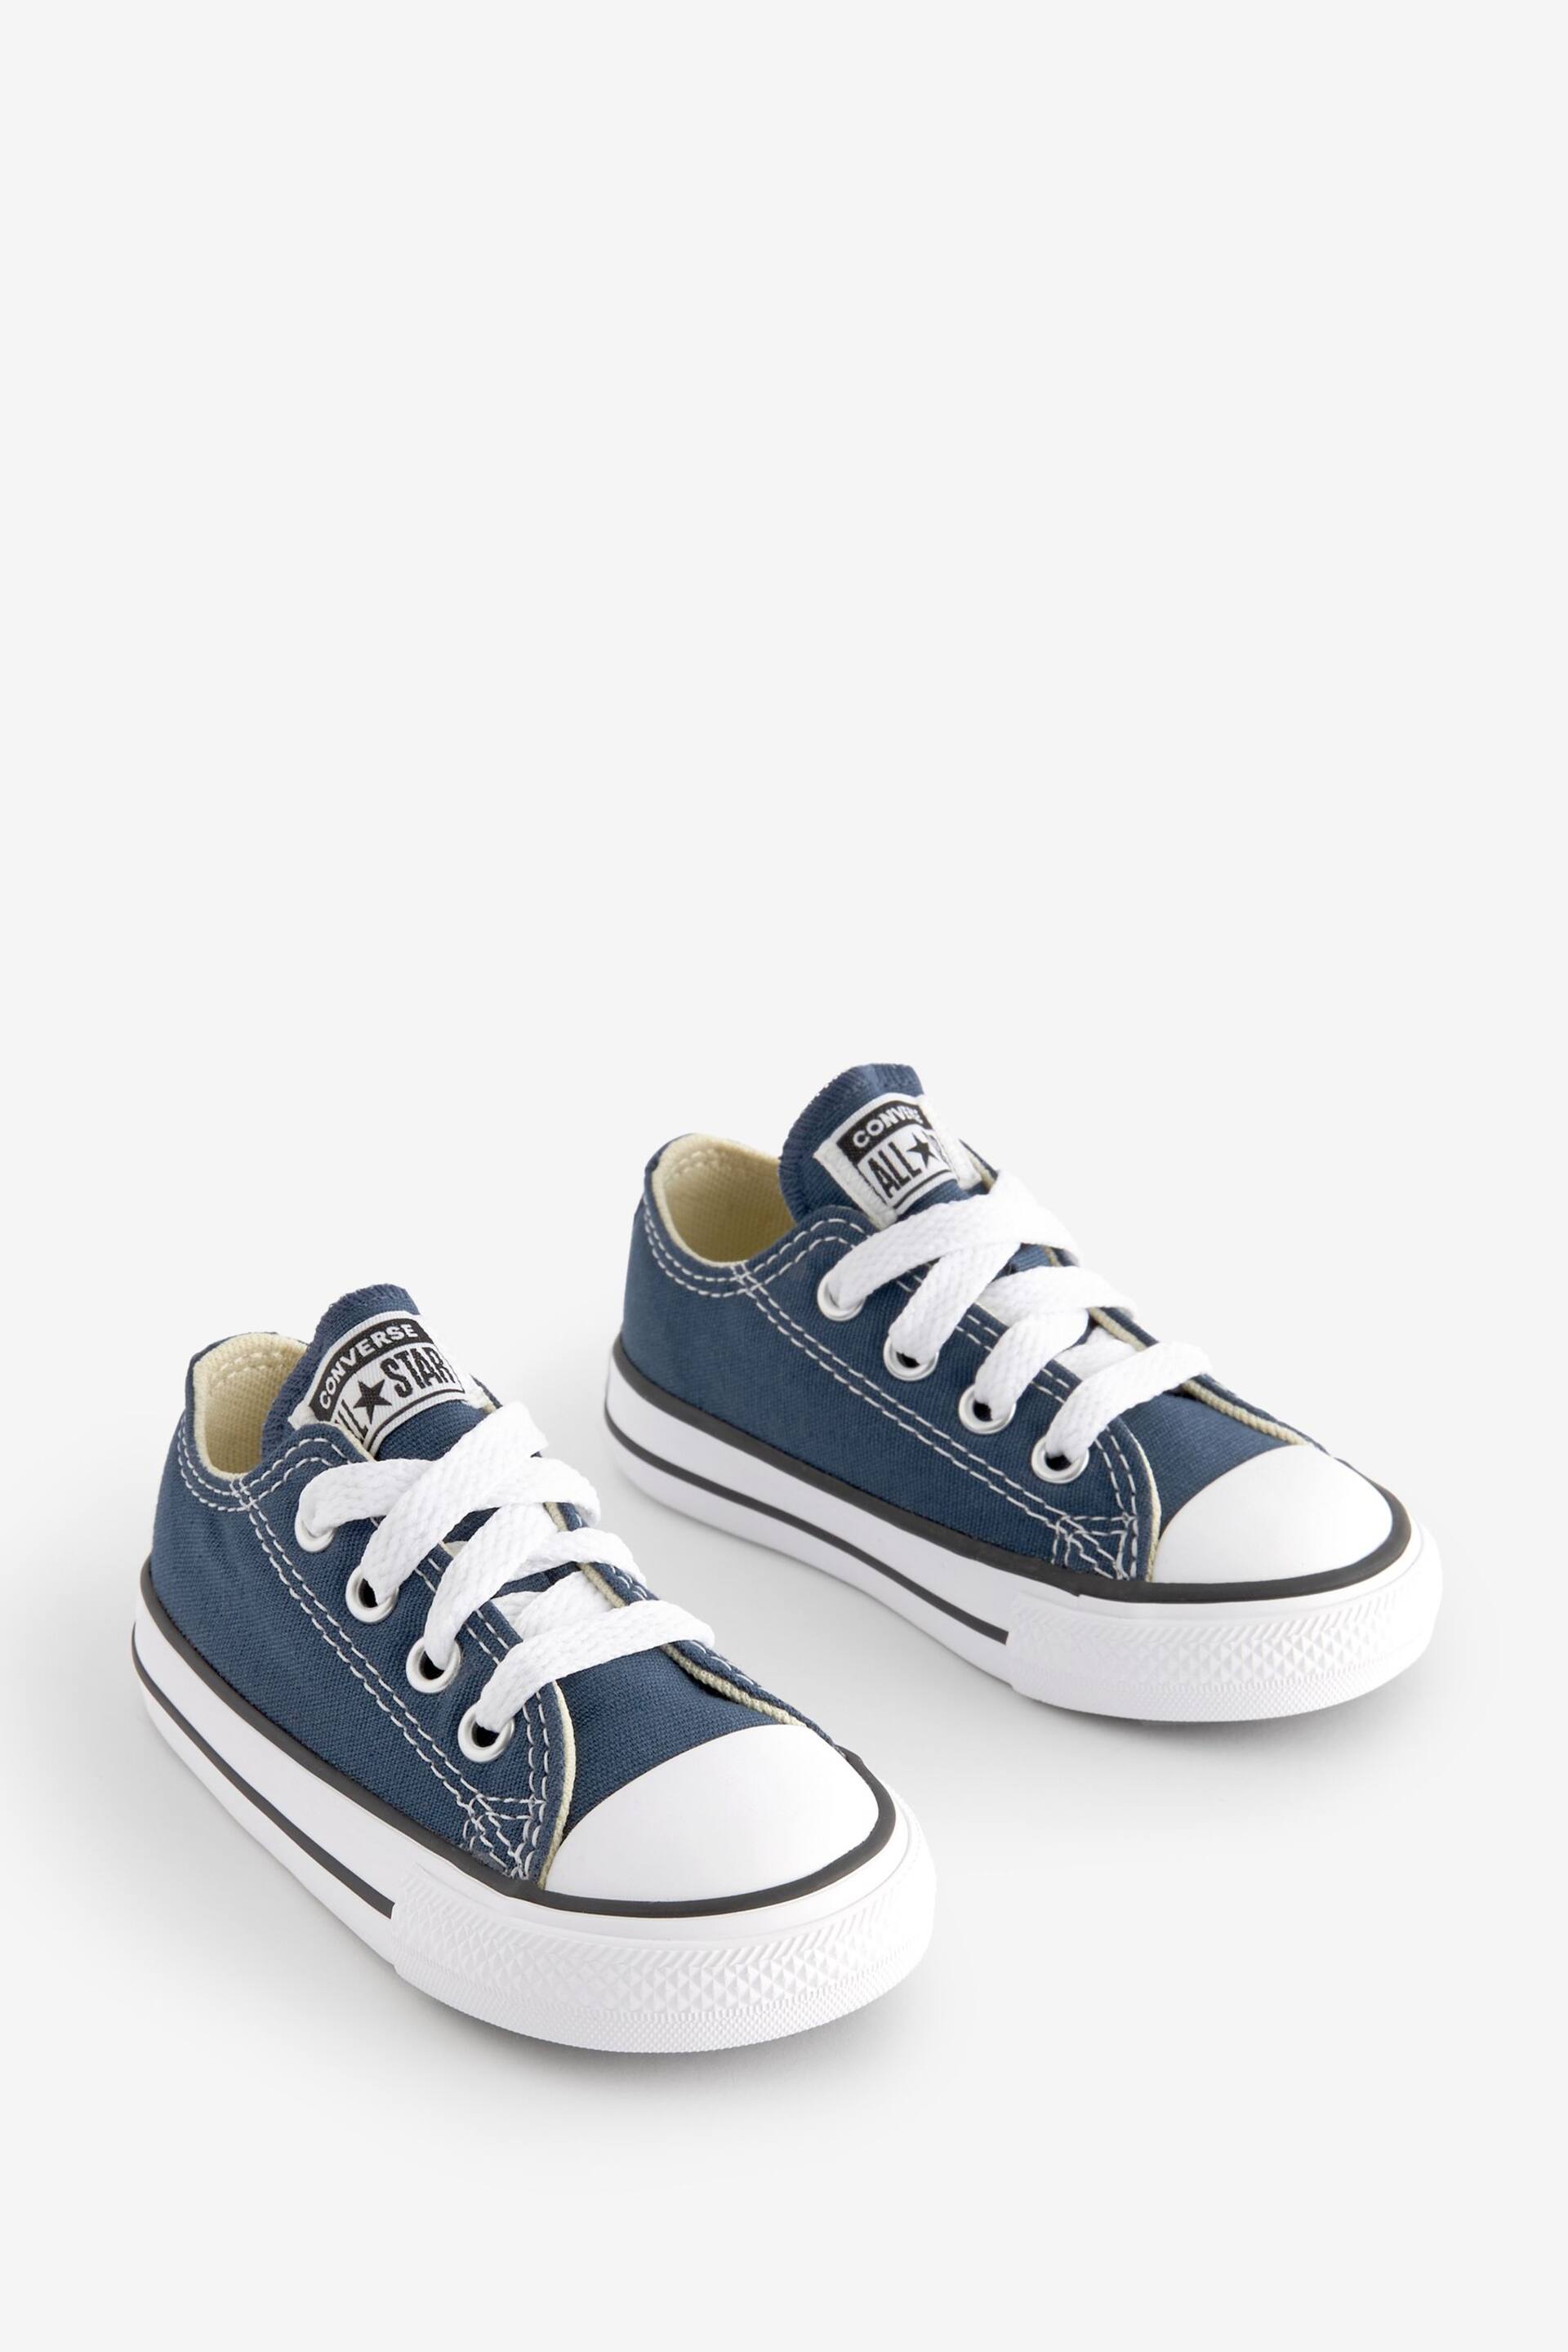 Converse Navy Chuck Taylor All Star Trainers - Image 3 of 6